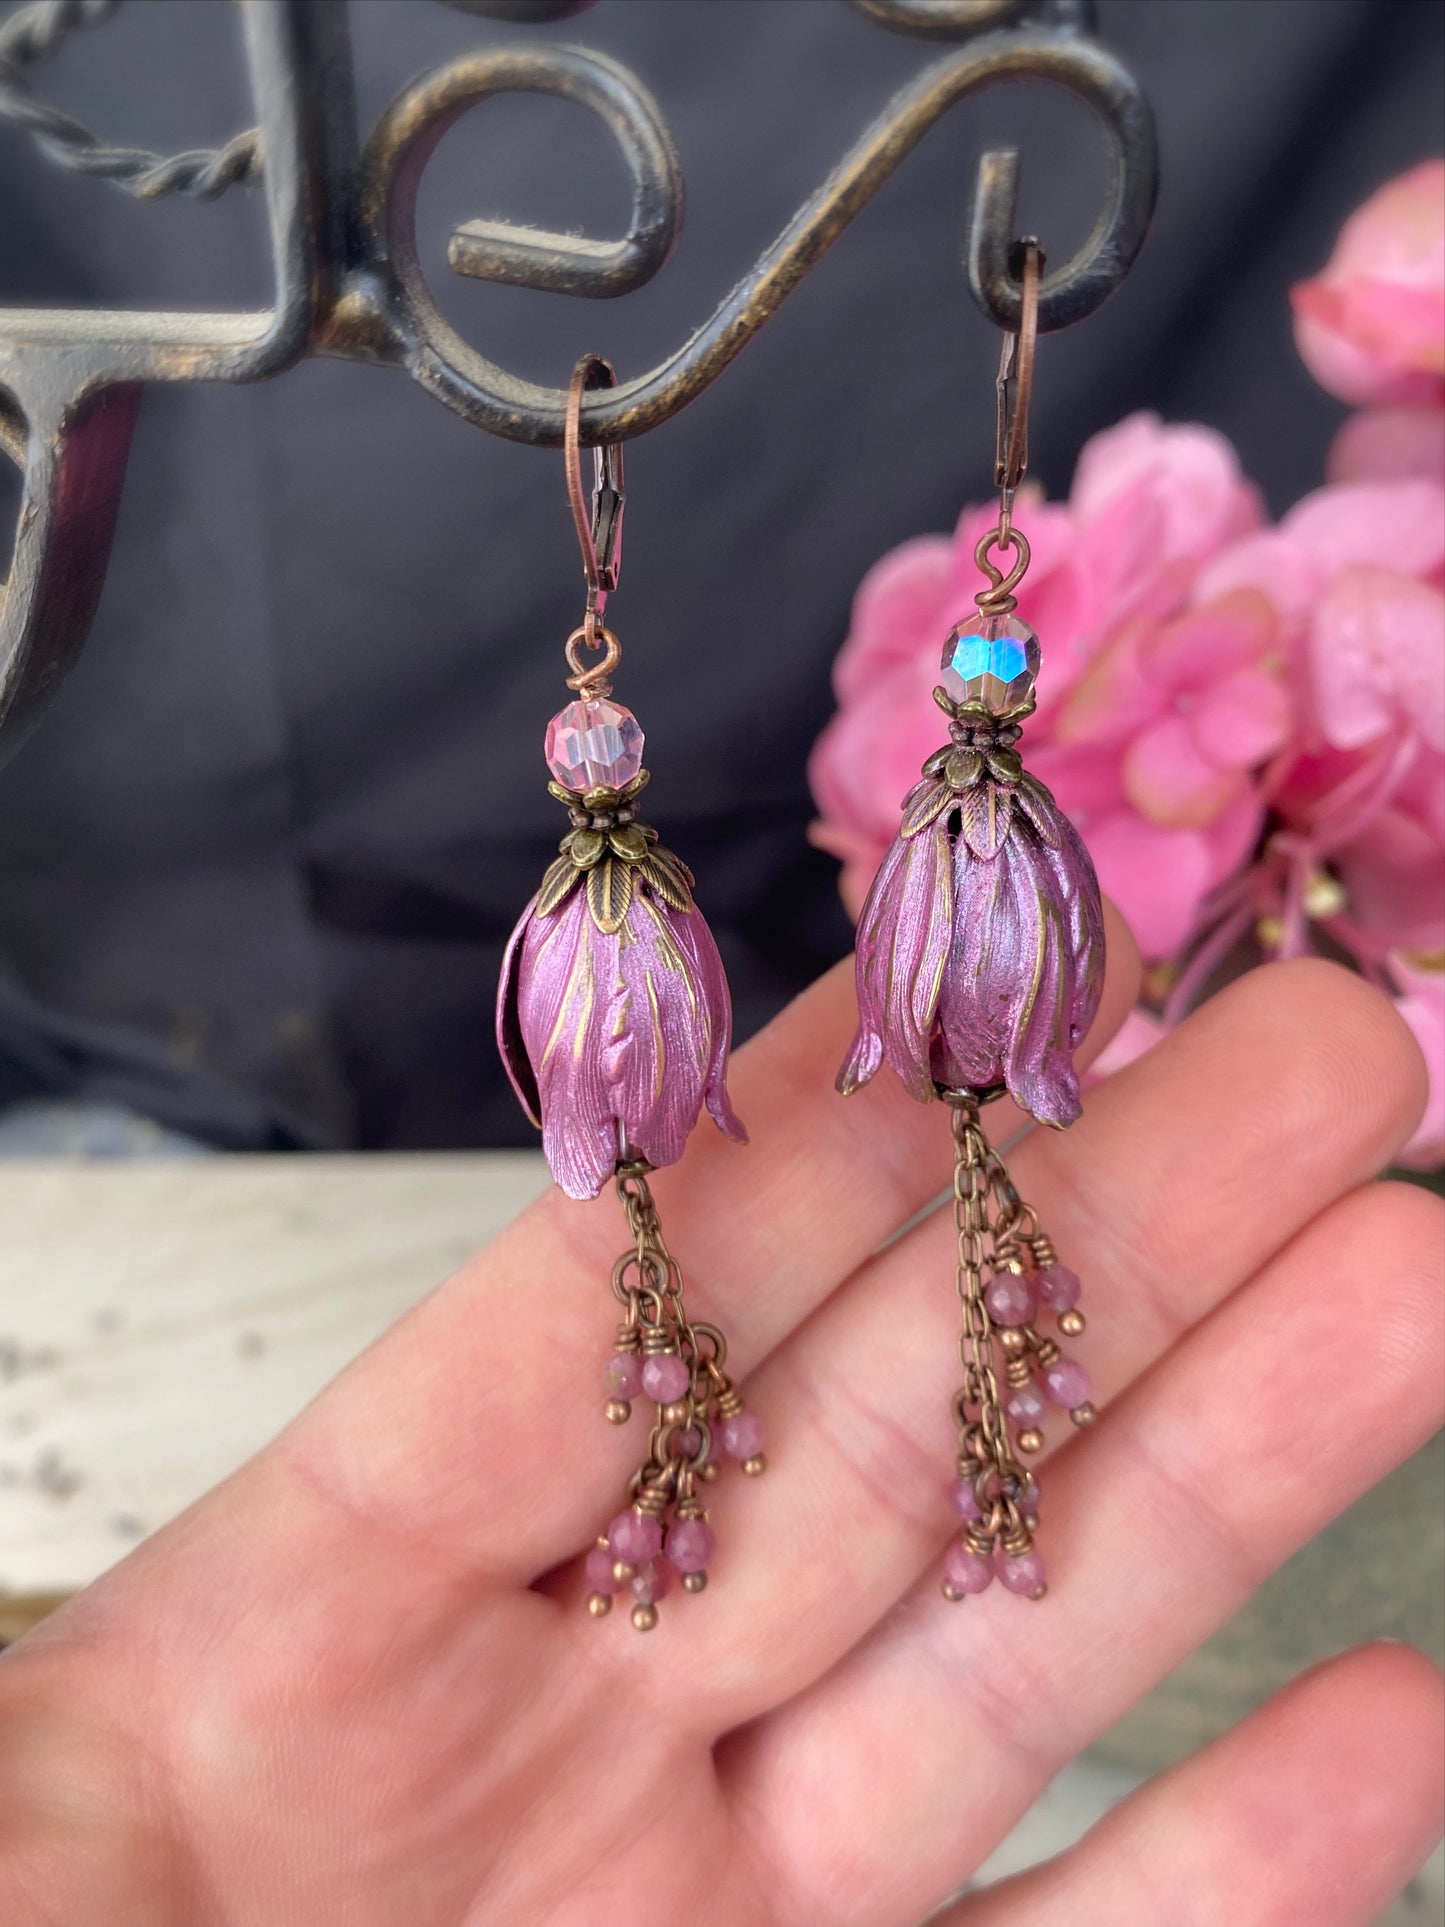 Pink crystal glass, pink tourmaline stone, flower bead caps, and copper metal earrings.